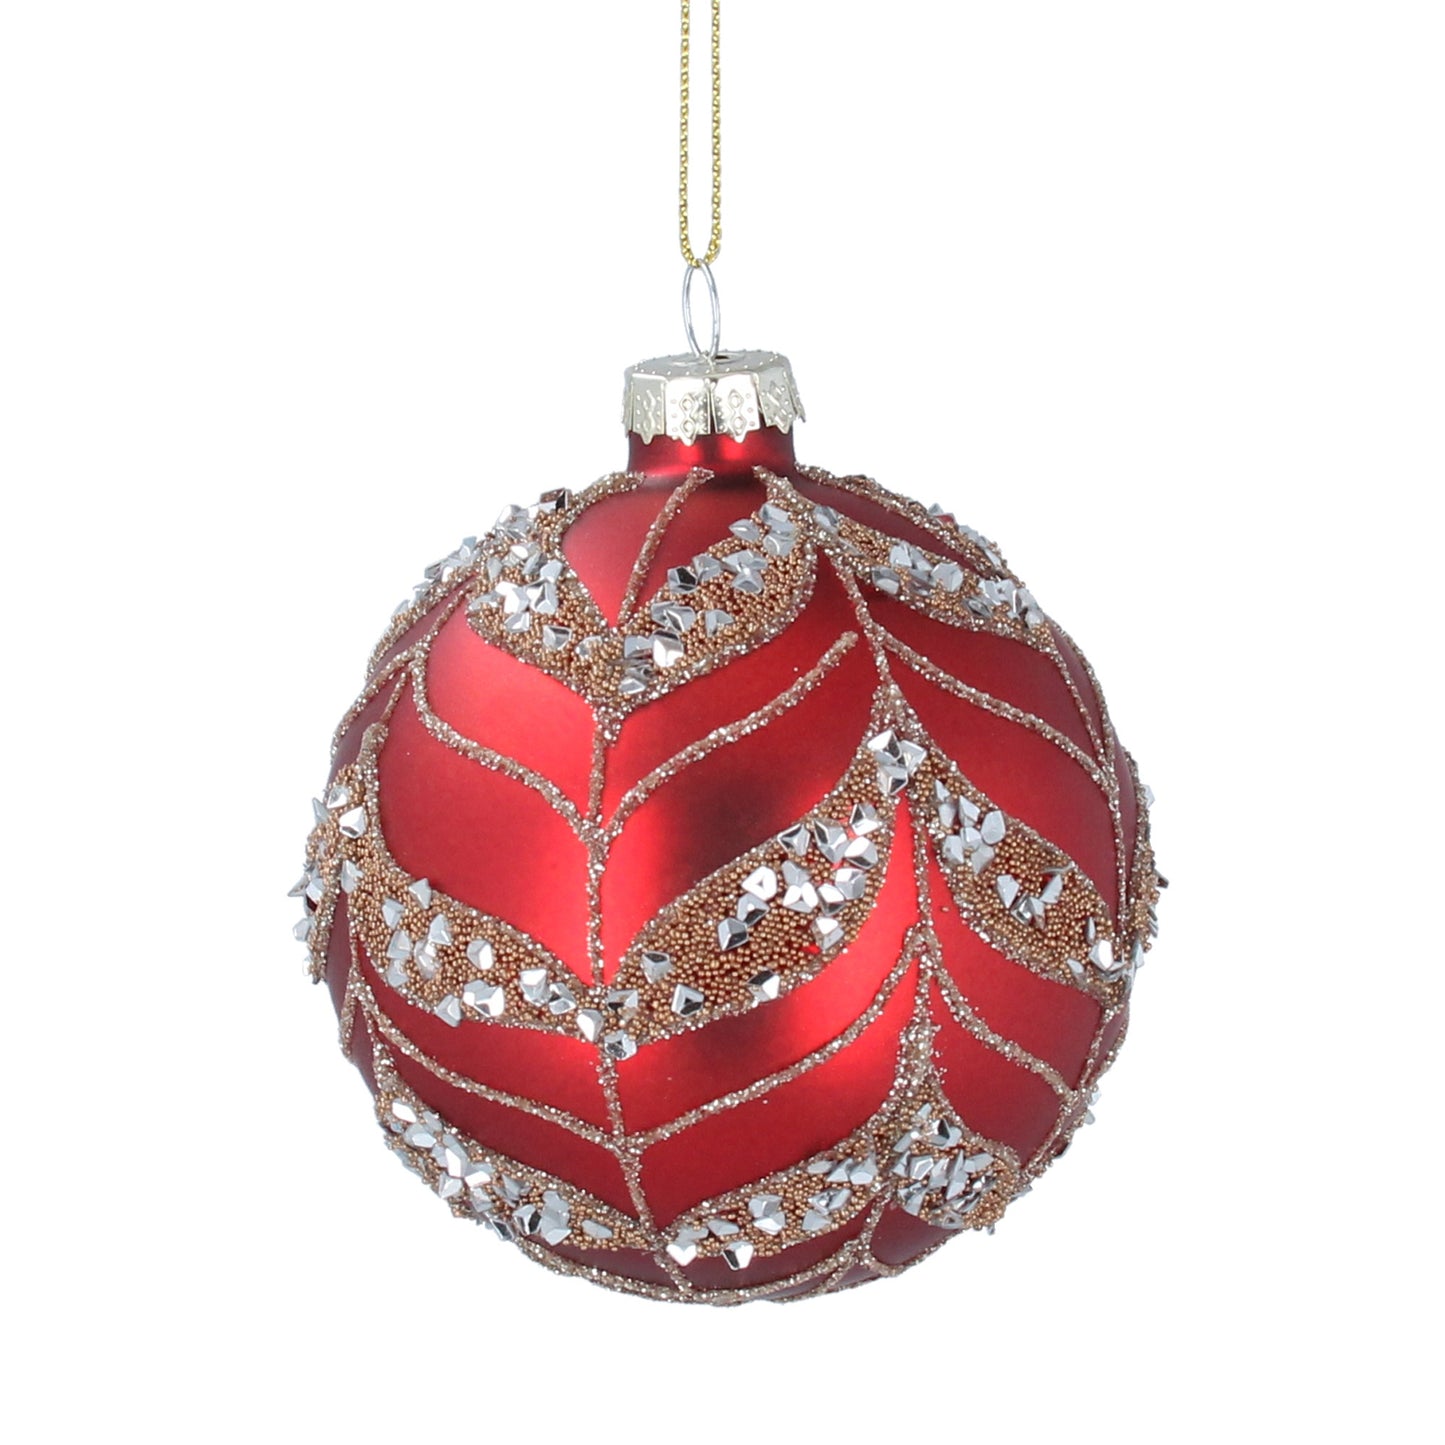 Red Glass Bauble with Gold Swags Not specified